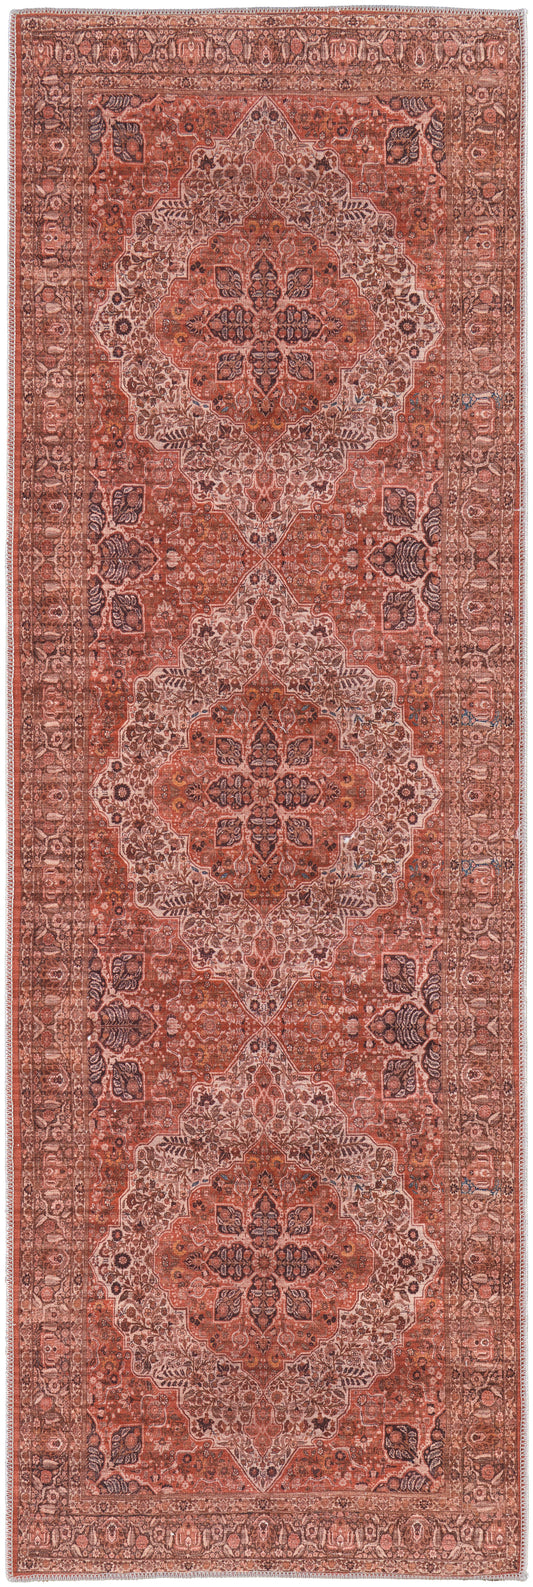 Feizy Rawlins Rln39Hnf Red/Tan/Pink Area Rug